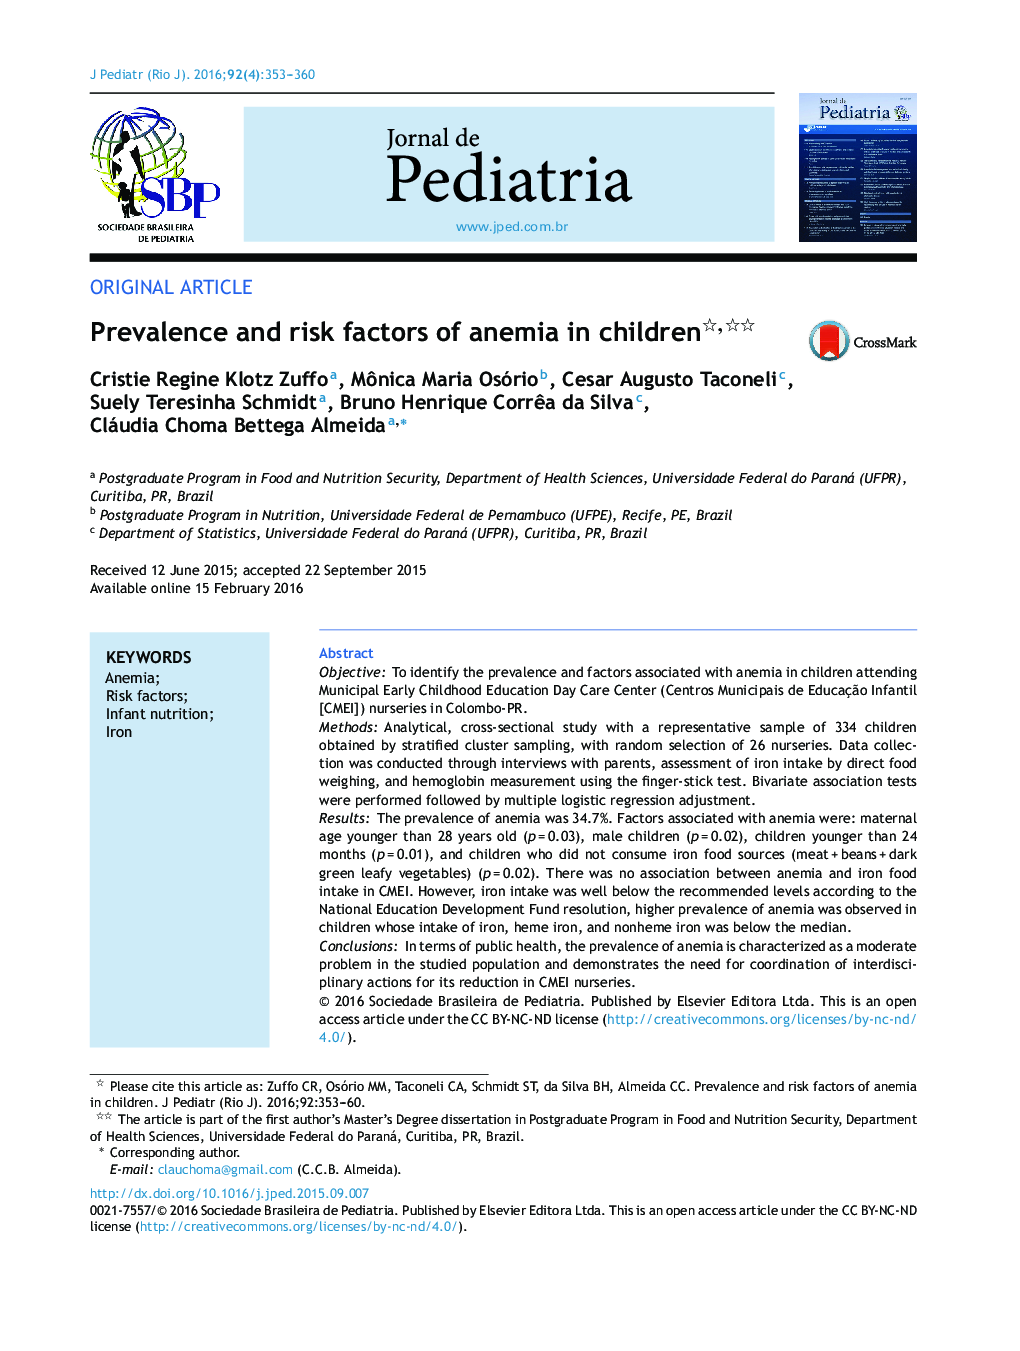 Prevalence and risk factors of anemia in children 